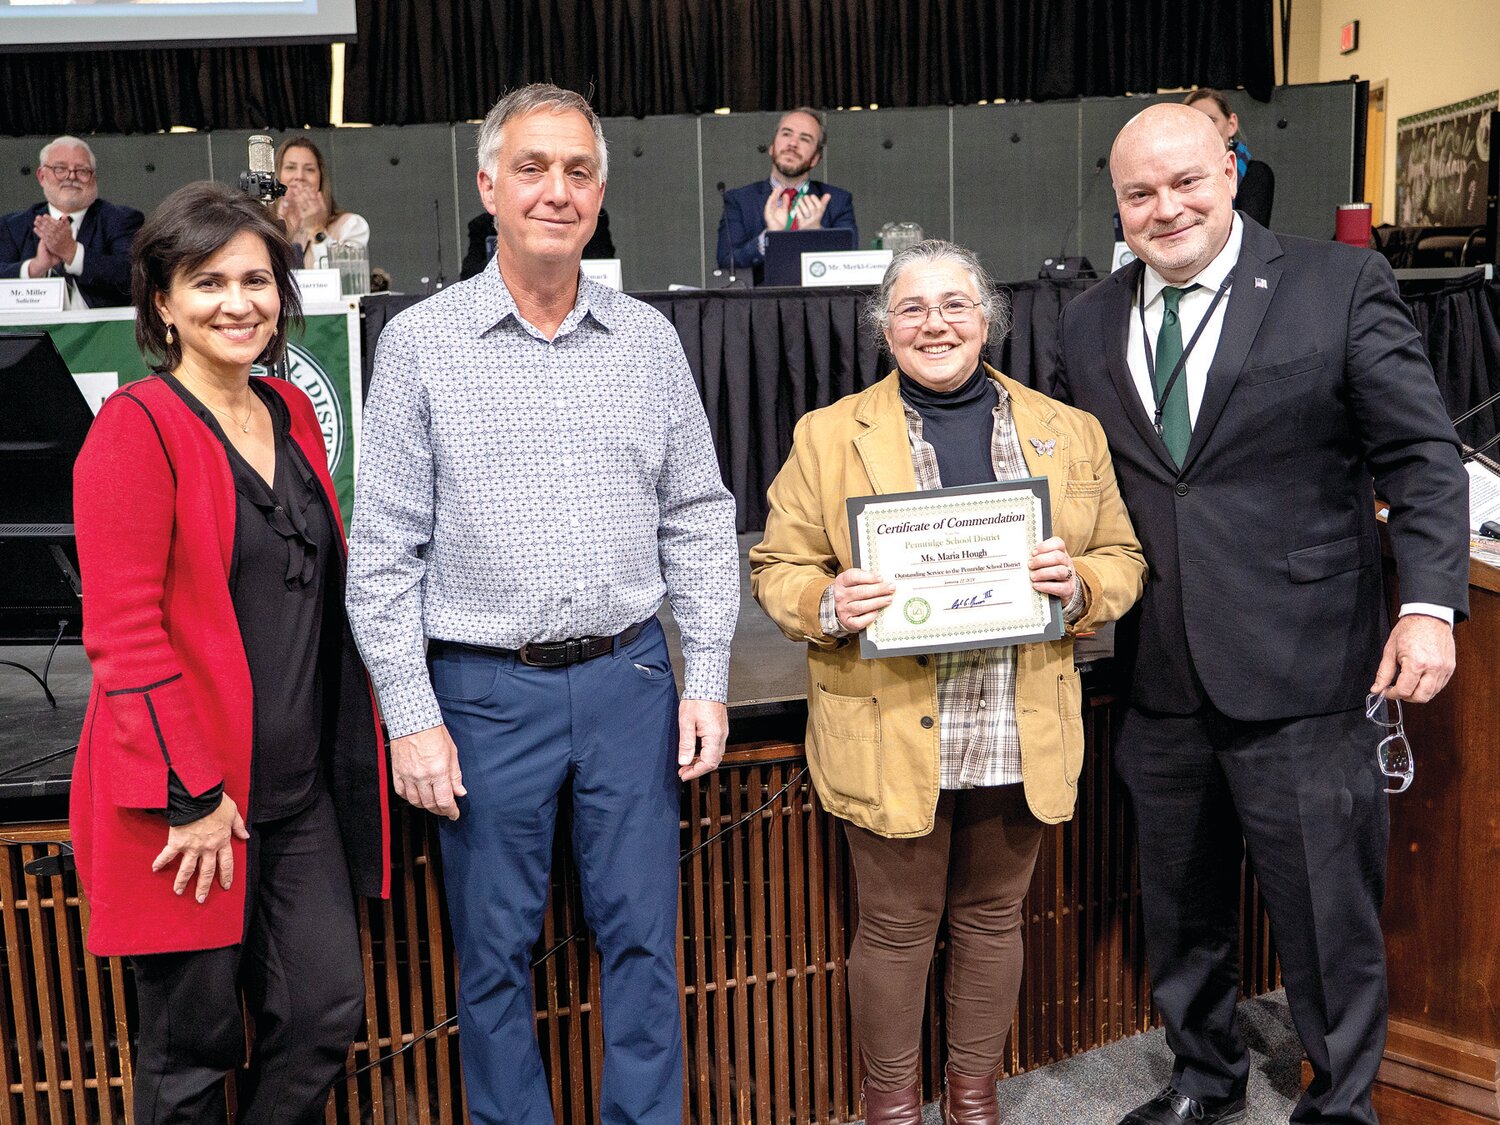 Maria Hough holds her Certificate of Commendation for Outstanding Service to Pennridge School District. With her at the award presentation are, from left, School Board Vice President Christine Batycki, School Board President Ron Wurz, and School Superintendent Angelo Berrios.